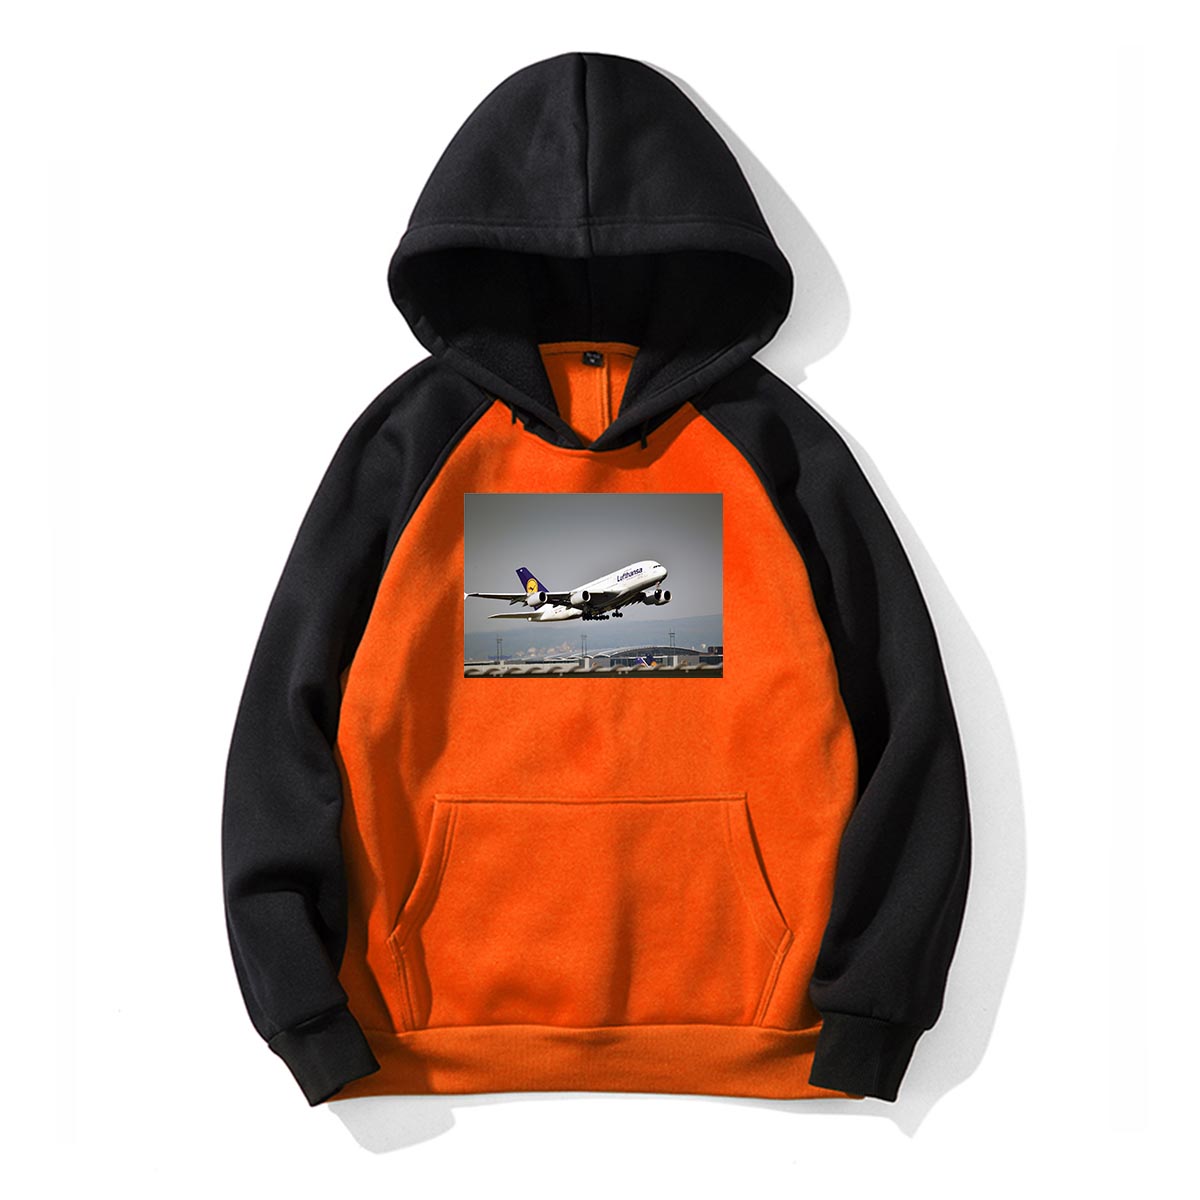 Departing Lufthansa A380 Designed Colourful Hoodies